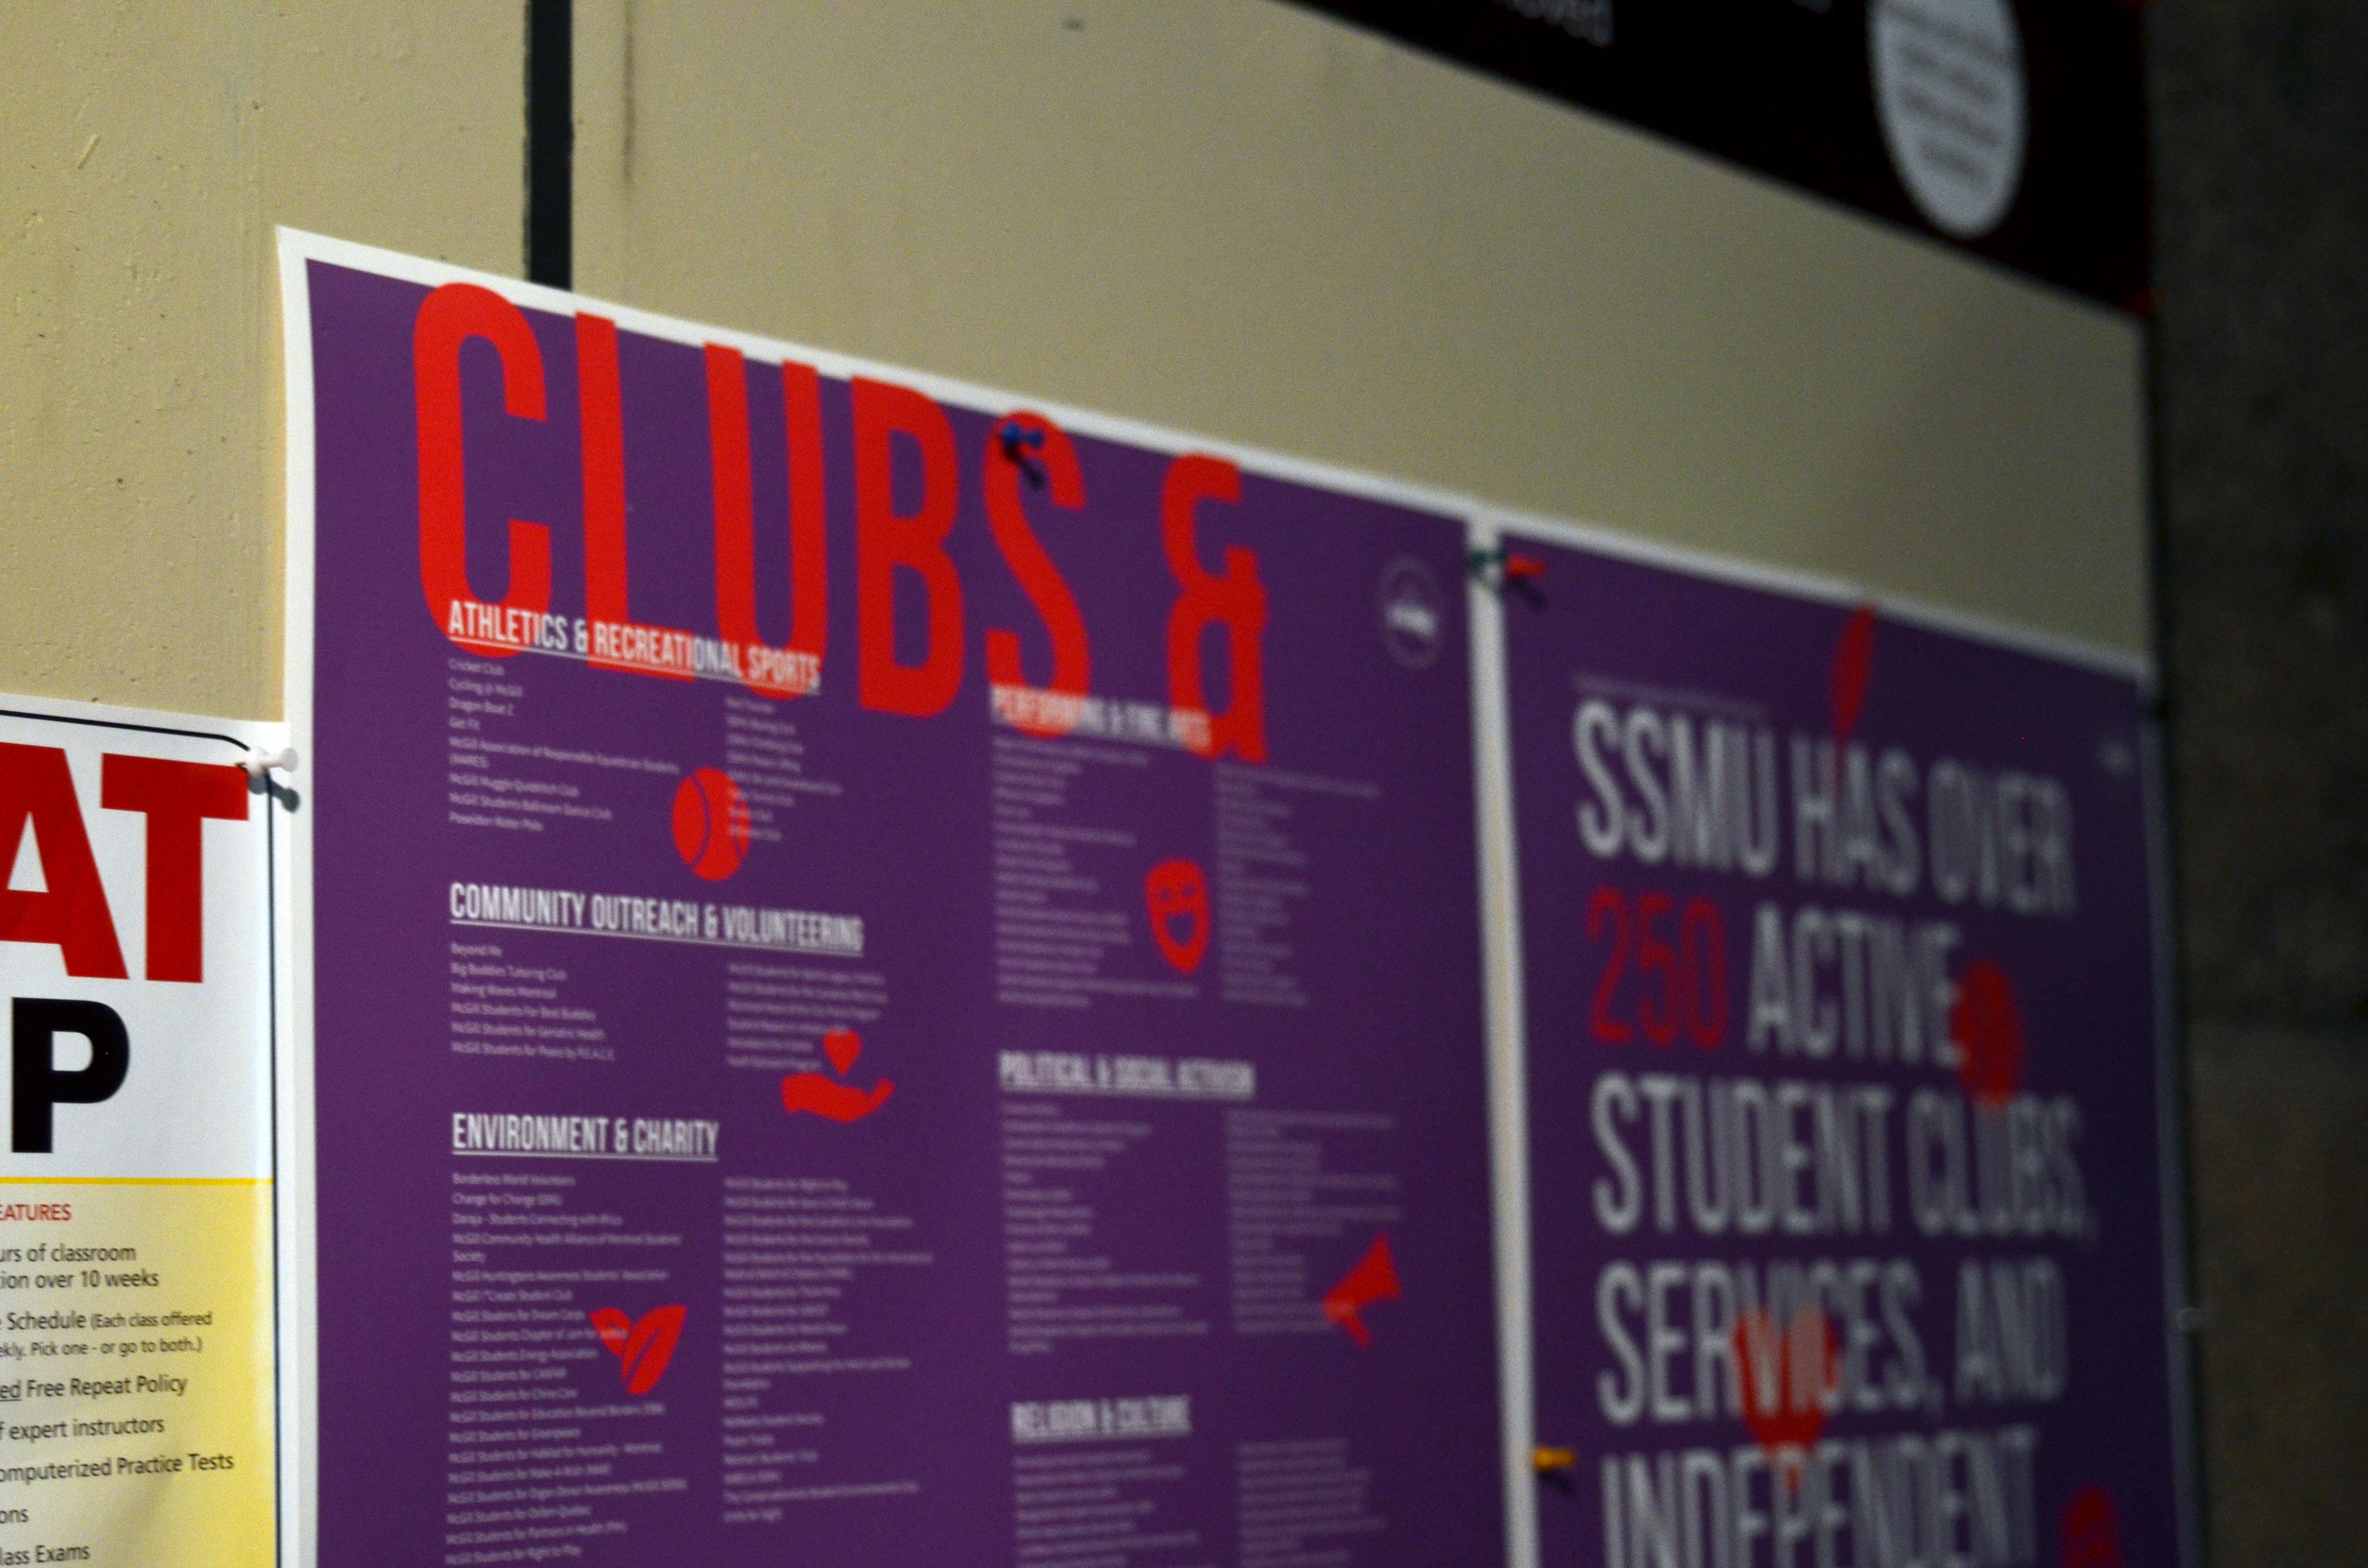 A photograph of a poster listing McGIll clubs and services